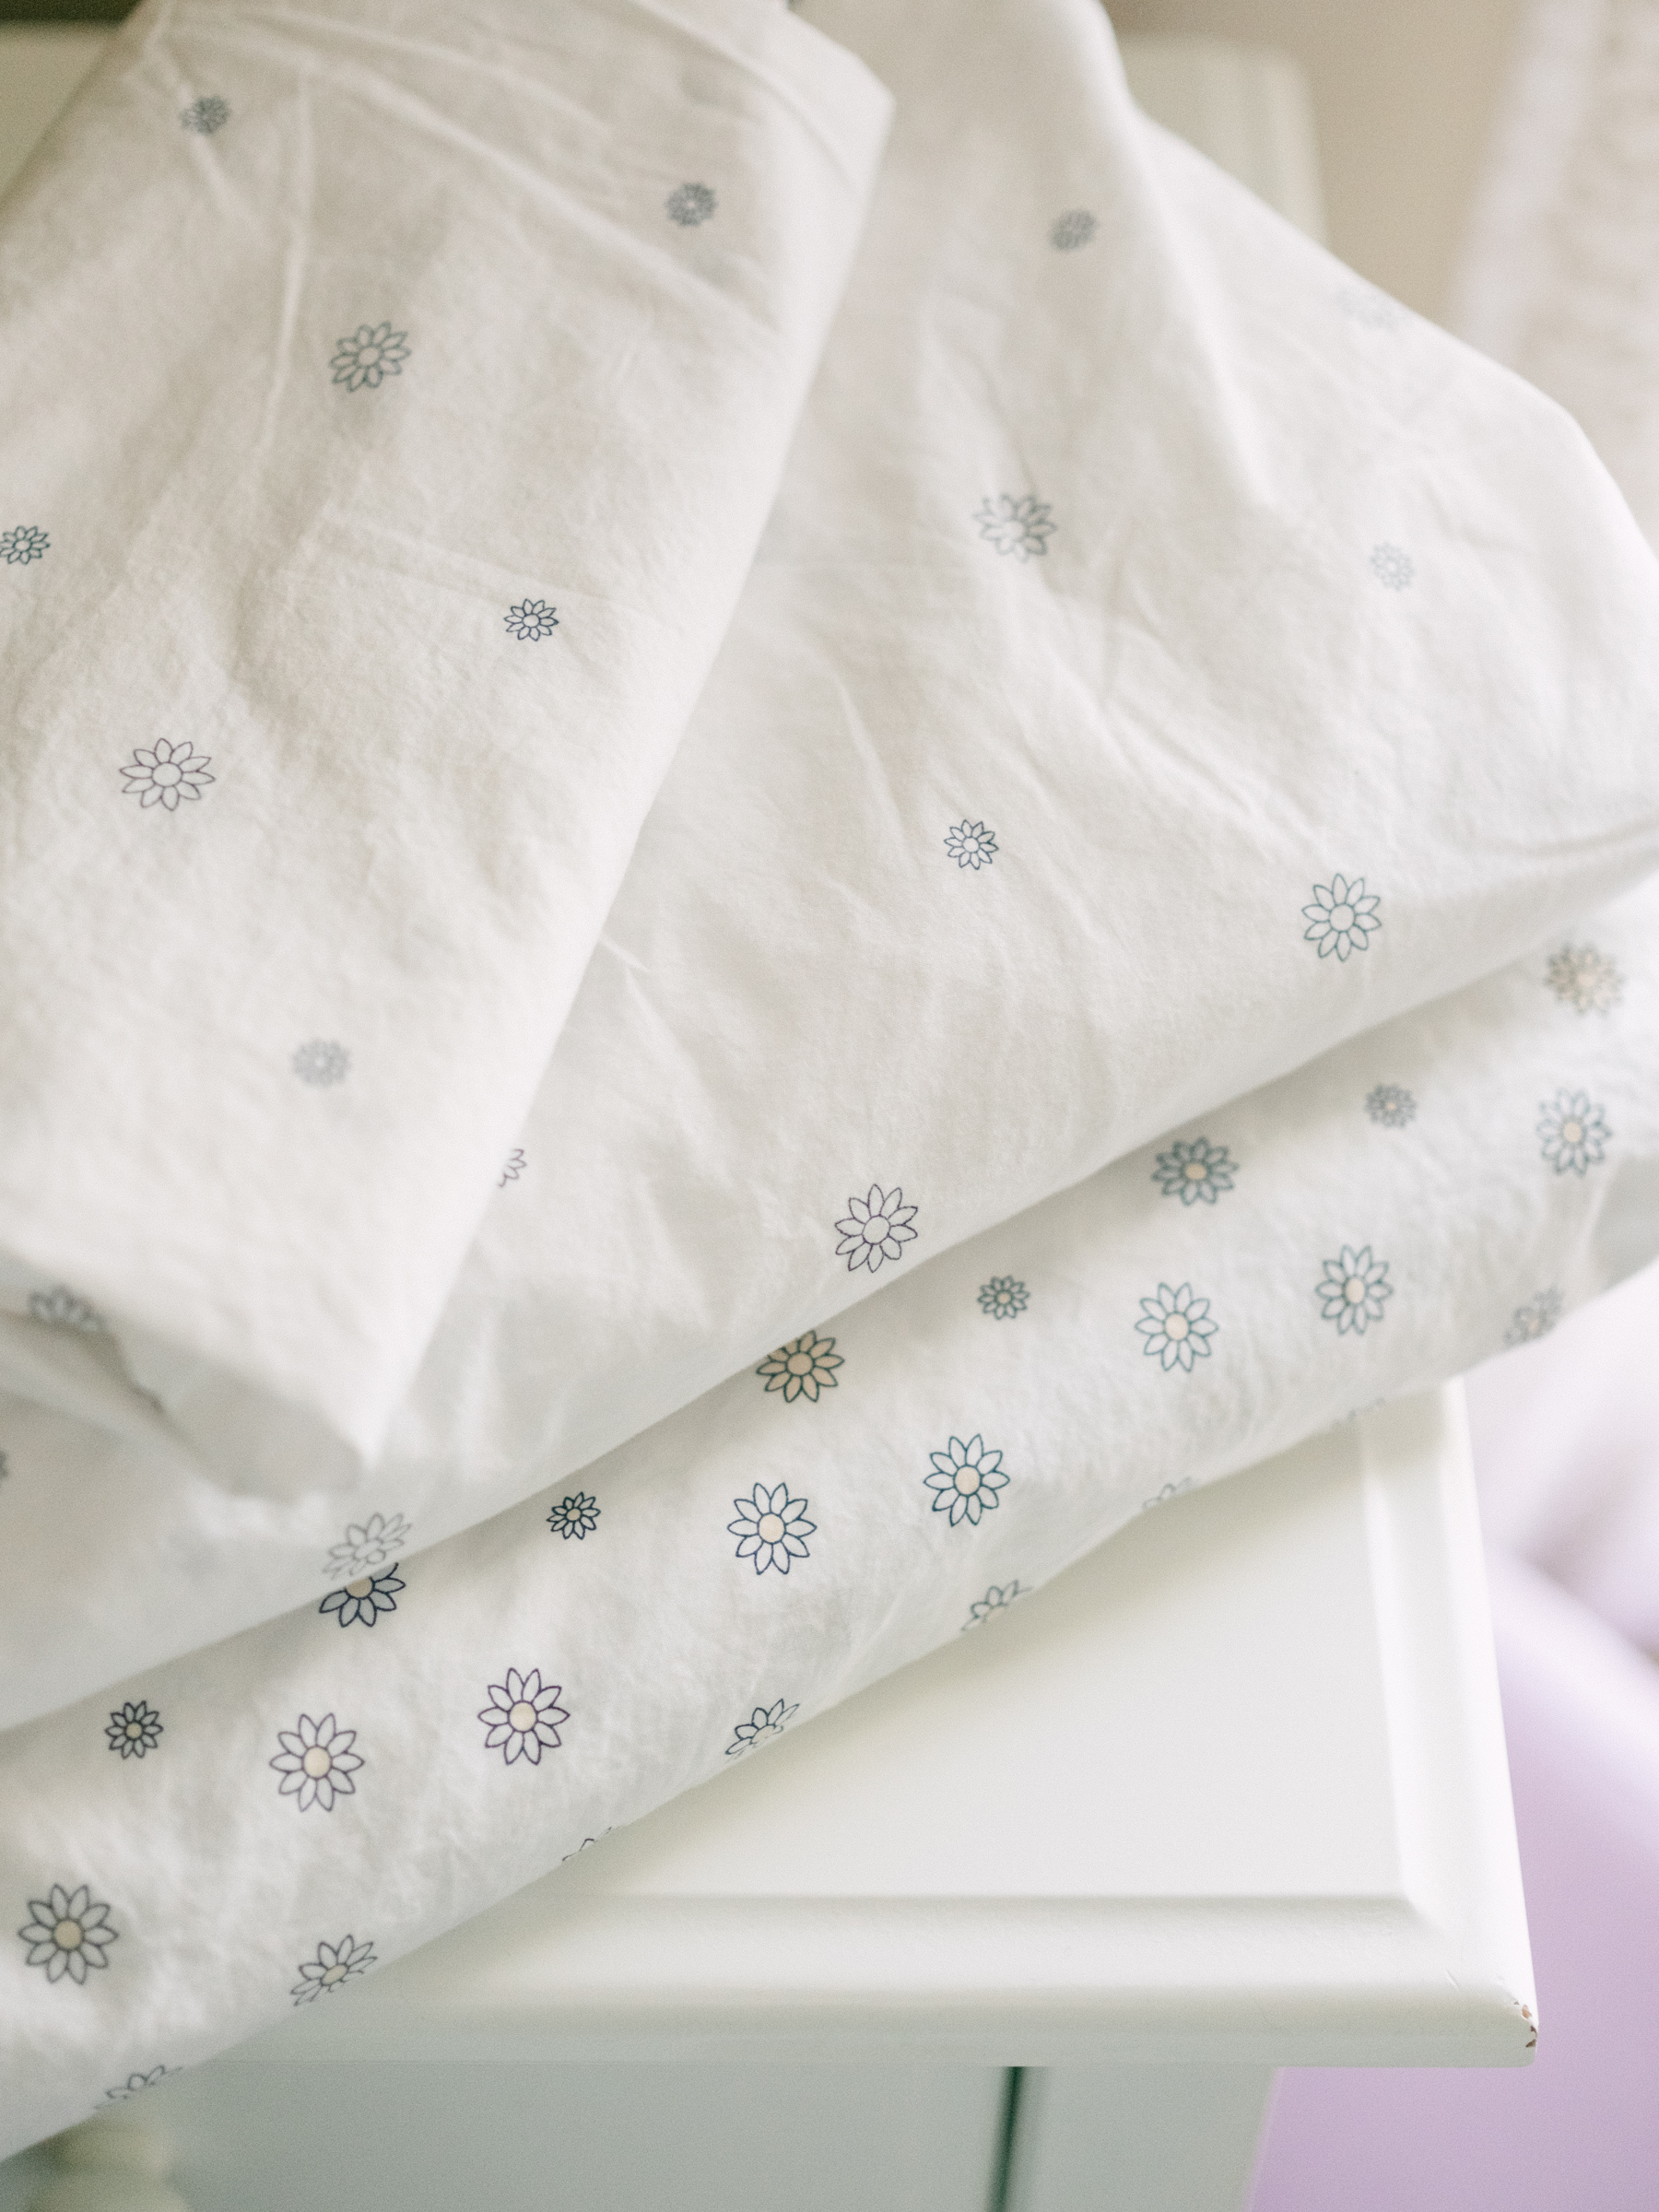 A close look at the Dewberry Kids Organic Bedding Chamomile Bloom Bundle